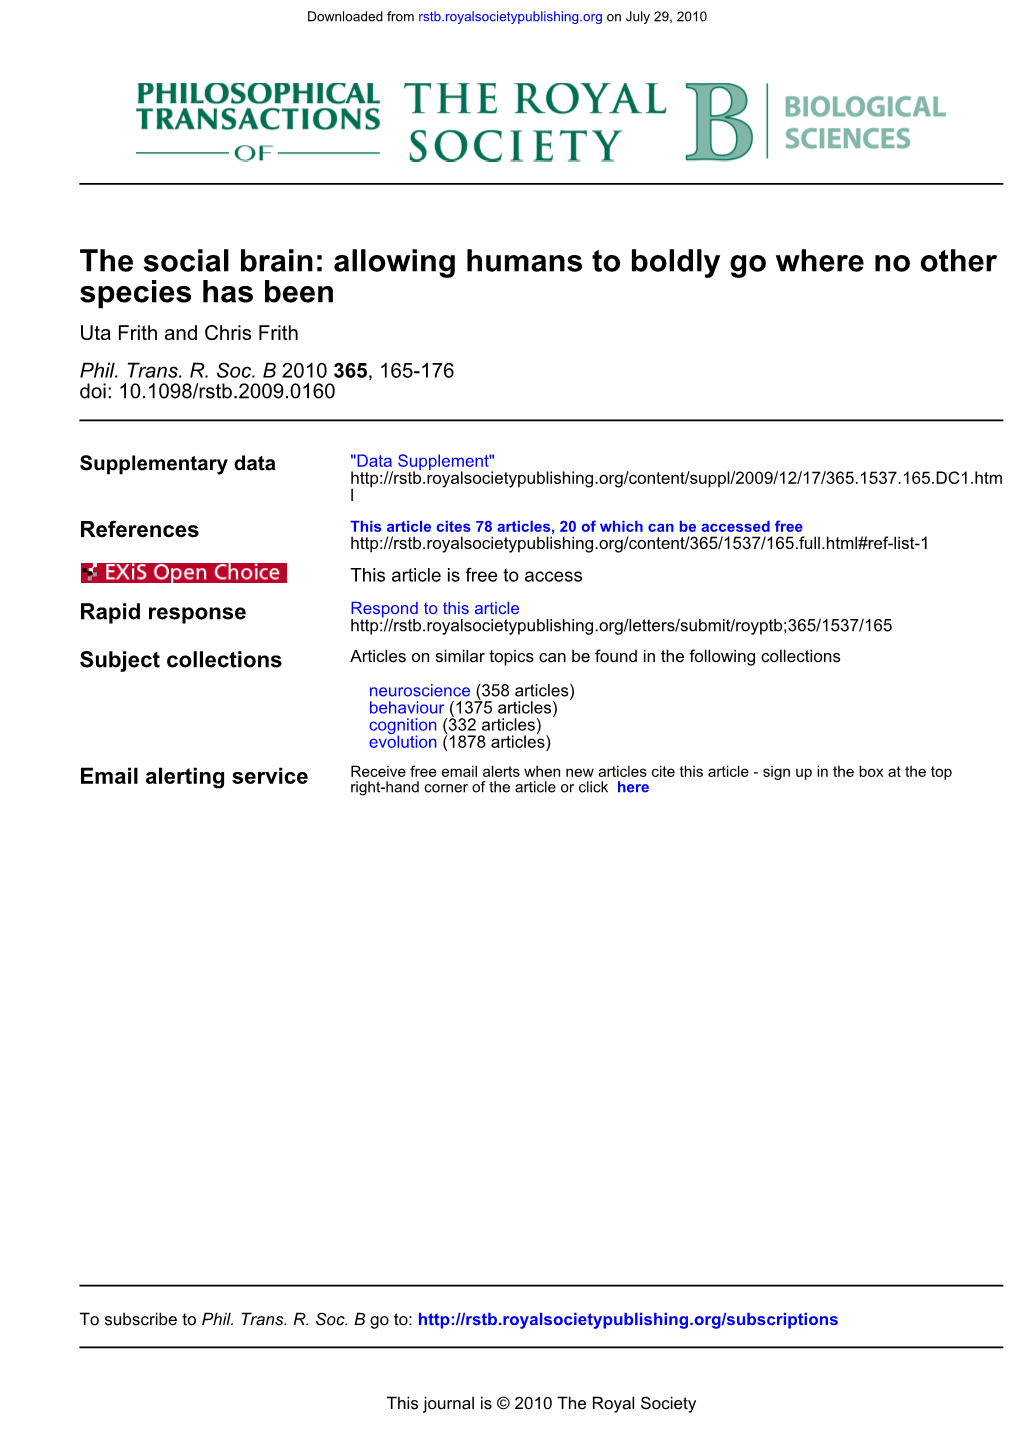 The Social Brain: Allowing Humans to Boldly Go Where No Other Species Has Been